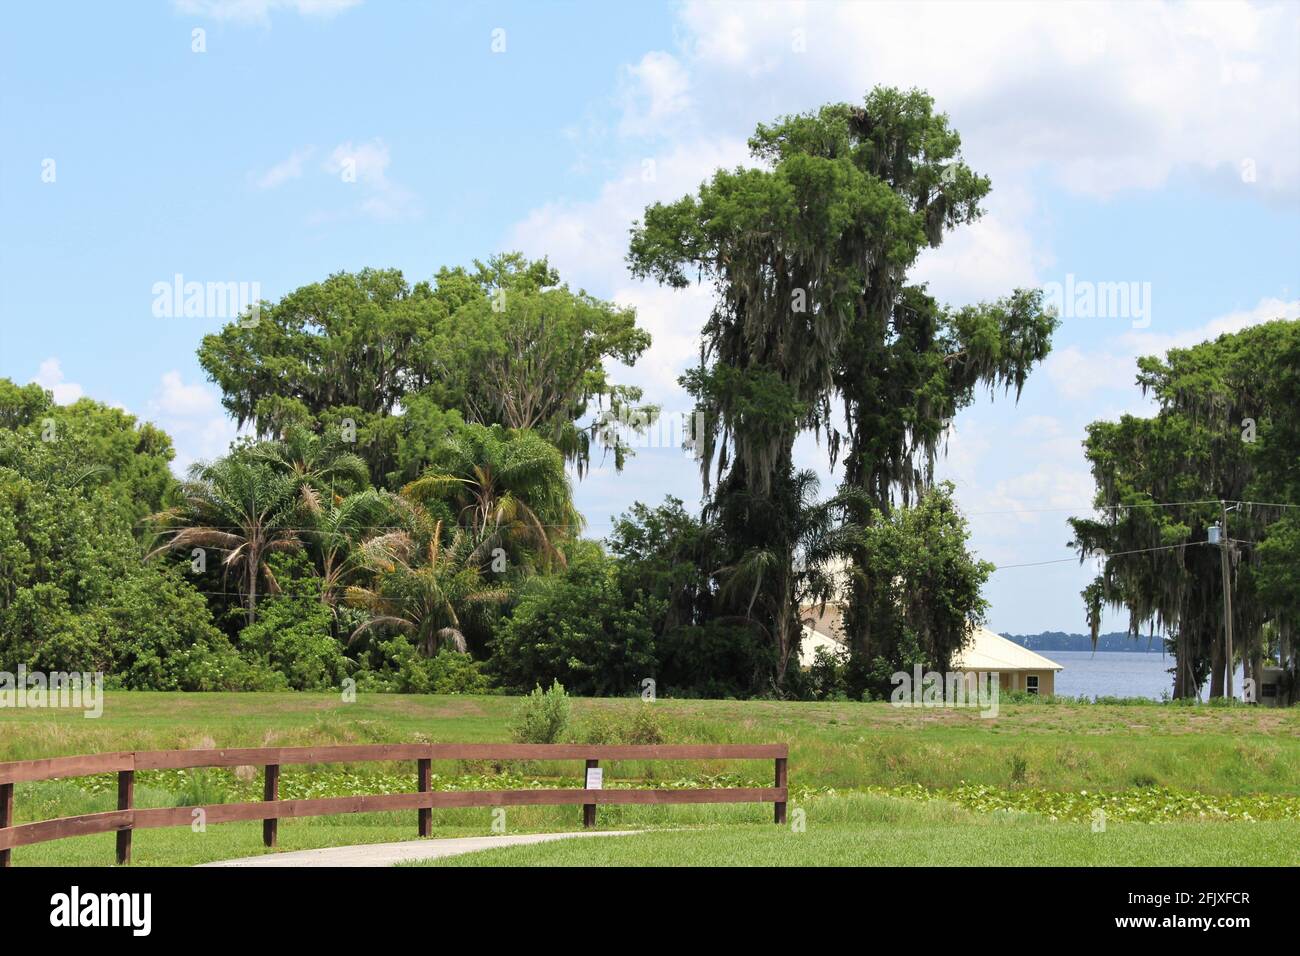 Public park area in Lake placid, Florida. Beautiful landscape scenery with a house in the background overlooking Lake Istokpoga. Stock Photo